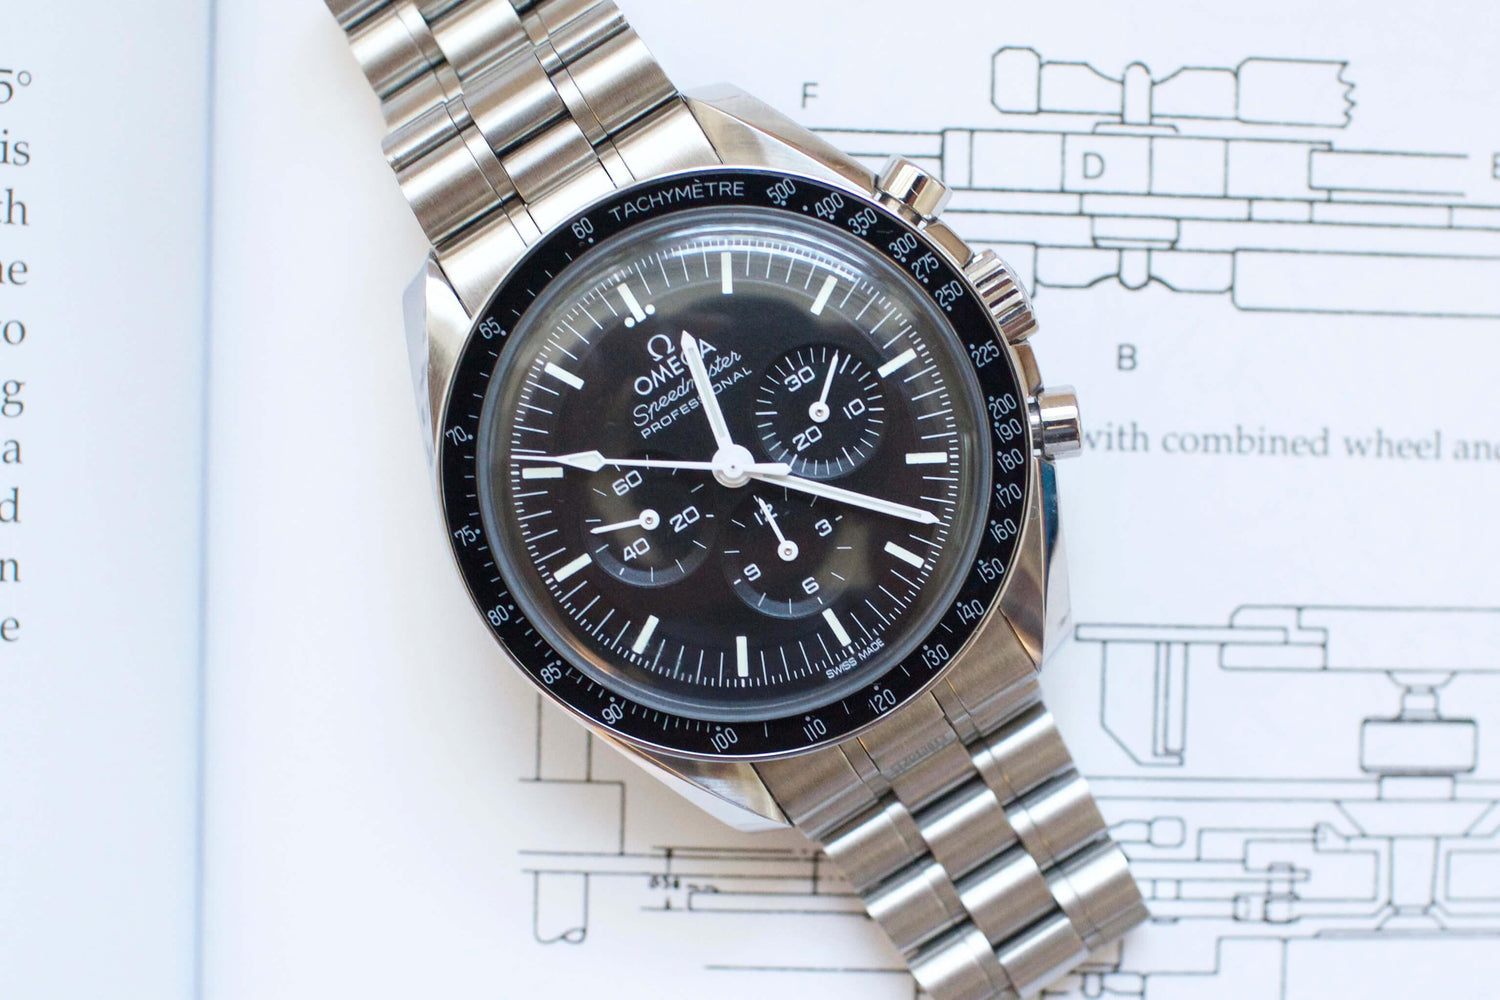 SOLDOUT: 2021 Omega Speedmaster Professional Co‑Axial 310.30.42.50.01.001 - WearingTime Luxury Watches